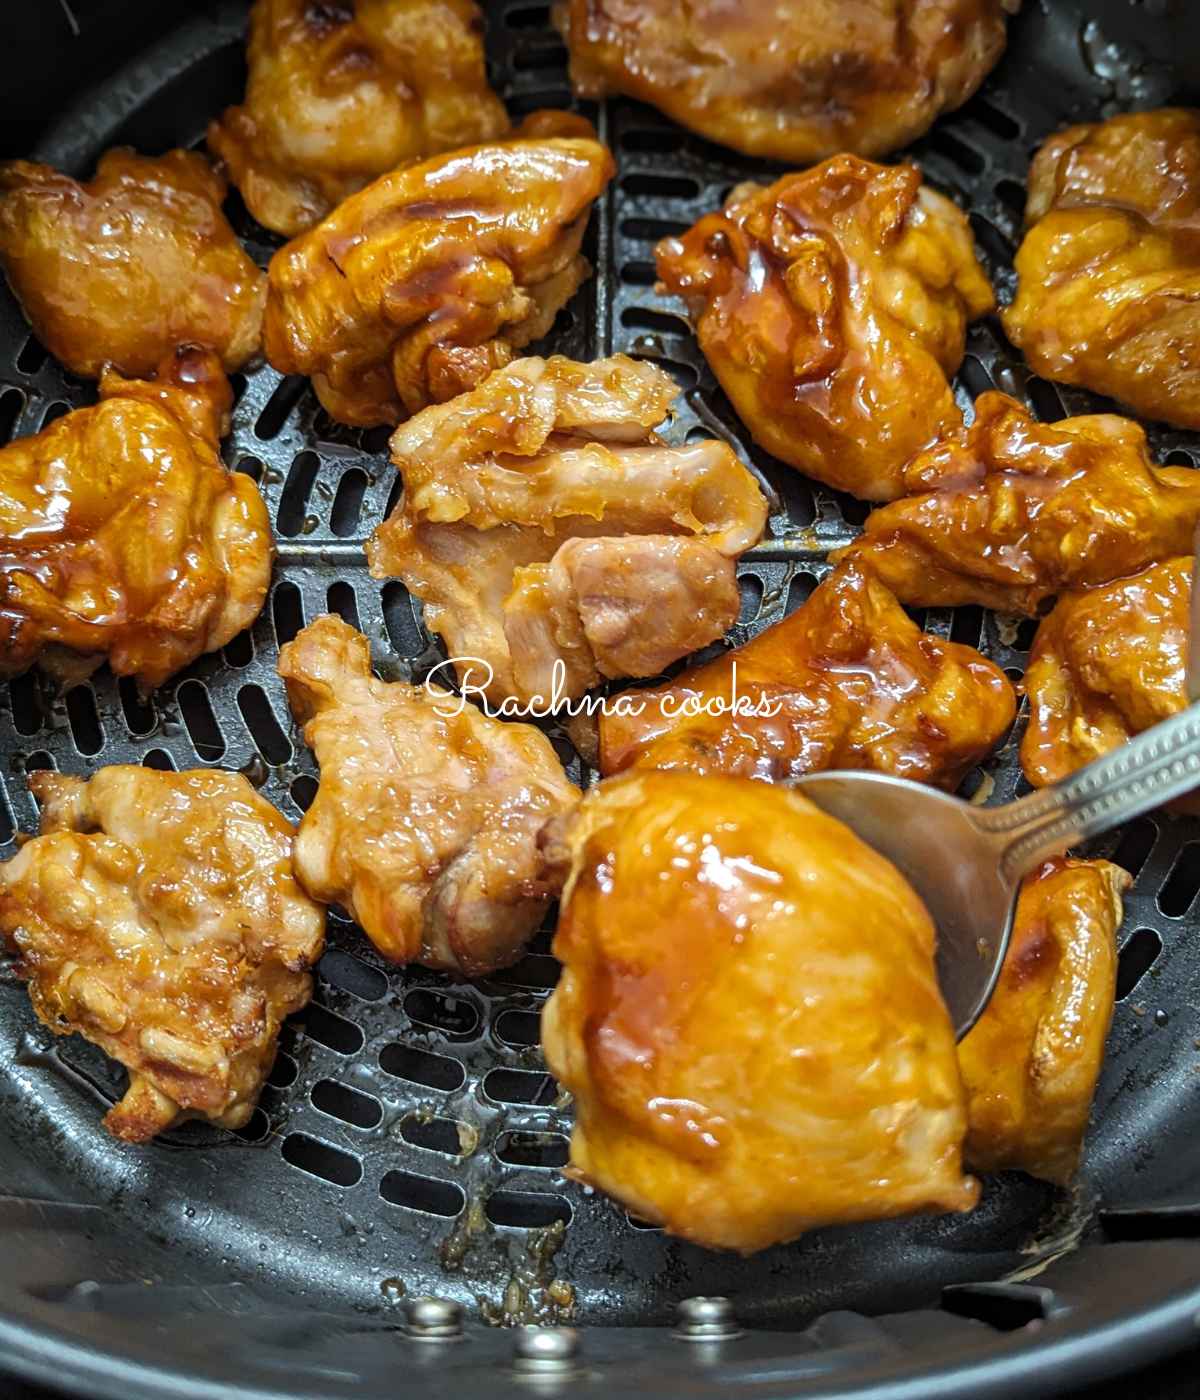 Teriyaki sauce being applied to the chicken being cooked